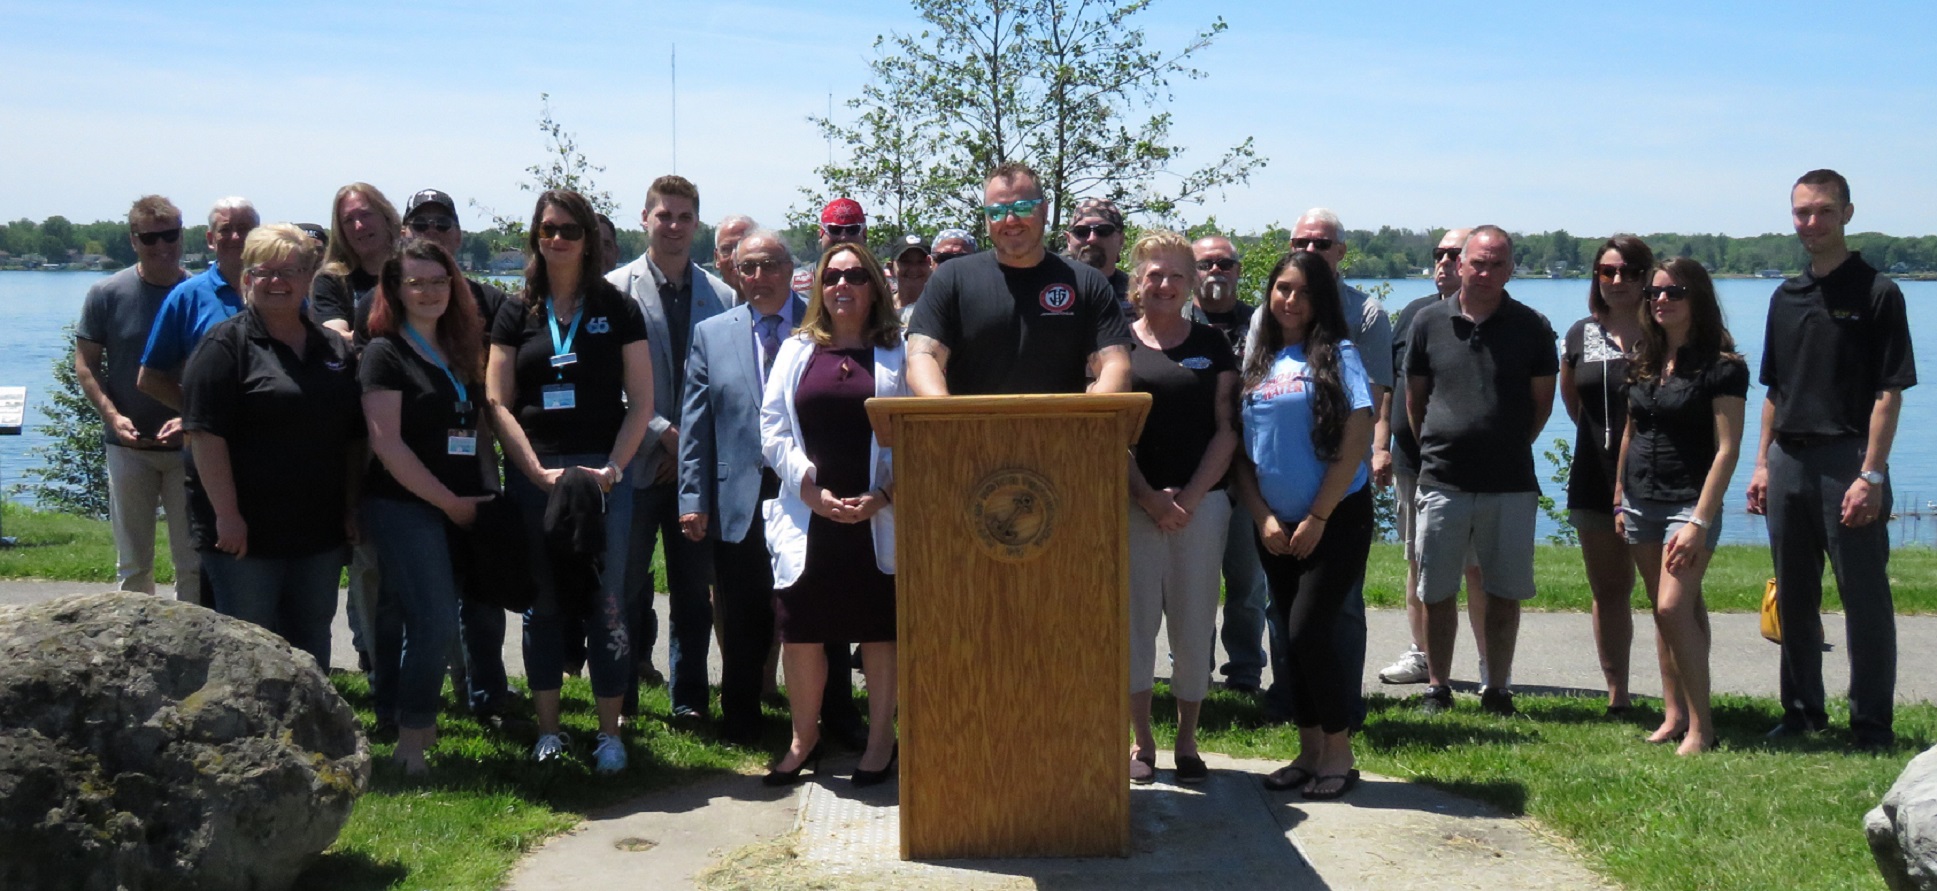 North Tonawanda Mayor Arthur Pappas, Thursdays on the Water promoter Jesse Gooch, city officials, sponsors and other representatives pose for a photo during Friday's presser. (Photo by David Yarger)